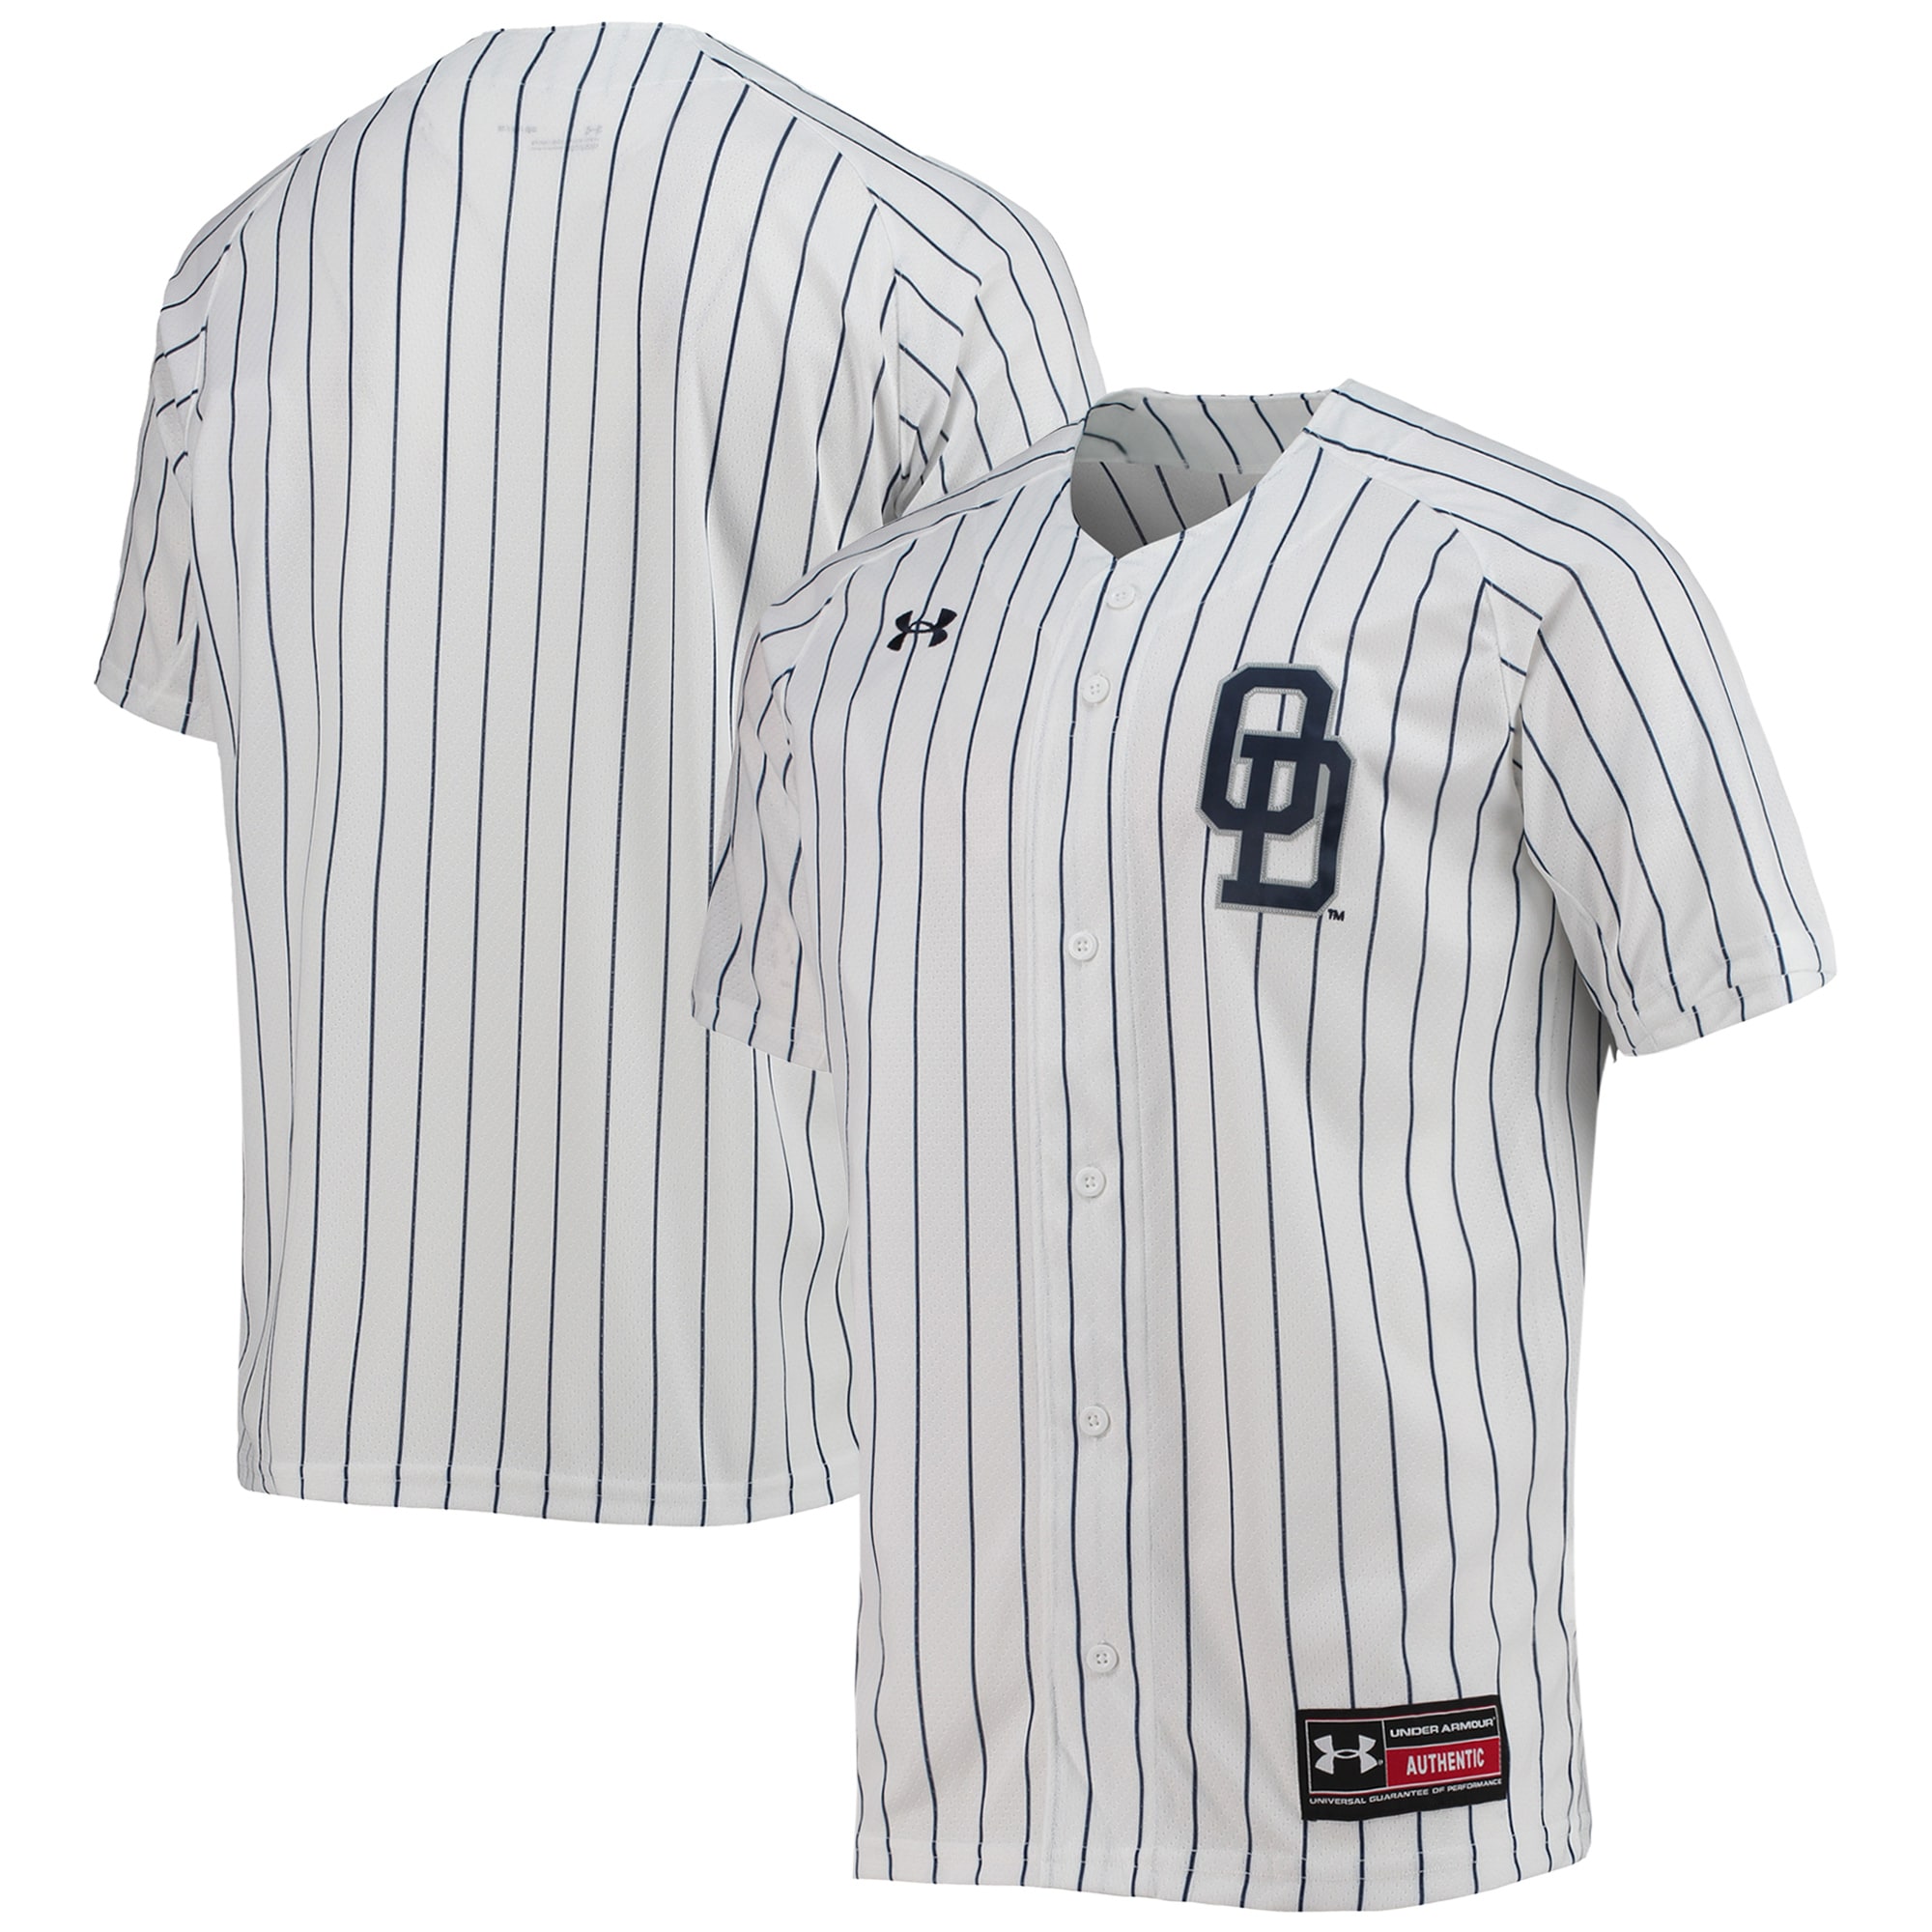 Old Dominion Monarchs Under Armour Pinstripe Replica Baseball Jersey - White For Youth Women Men